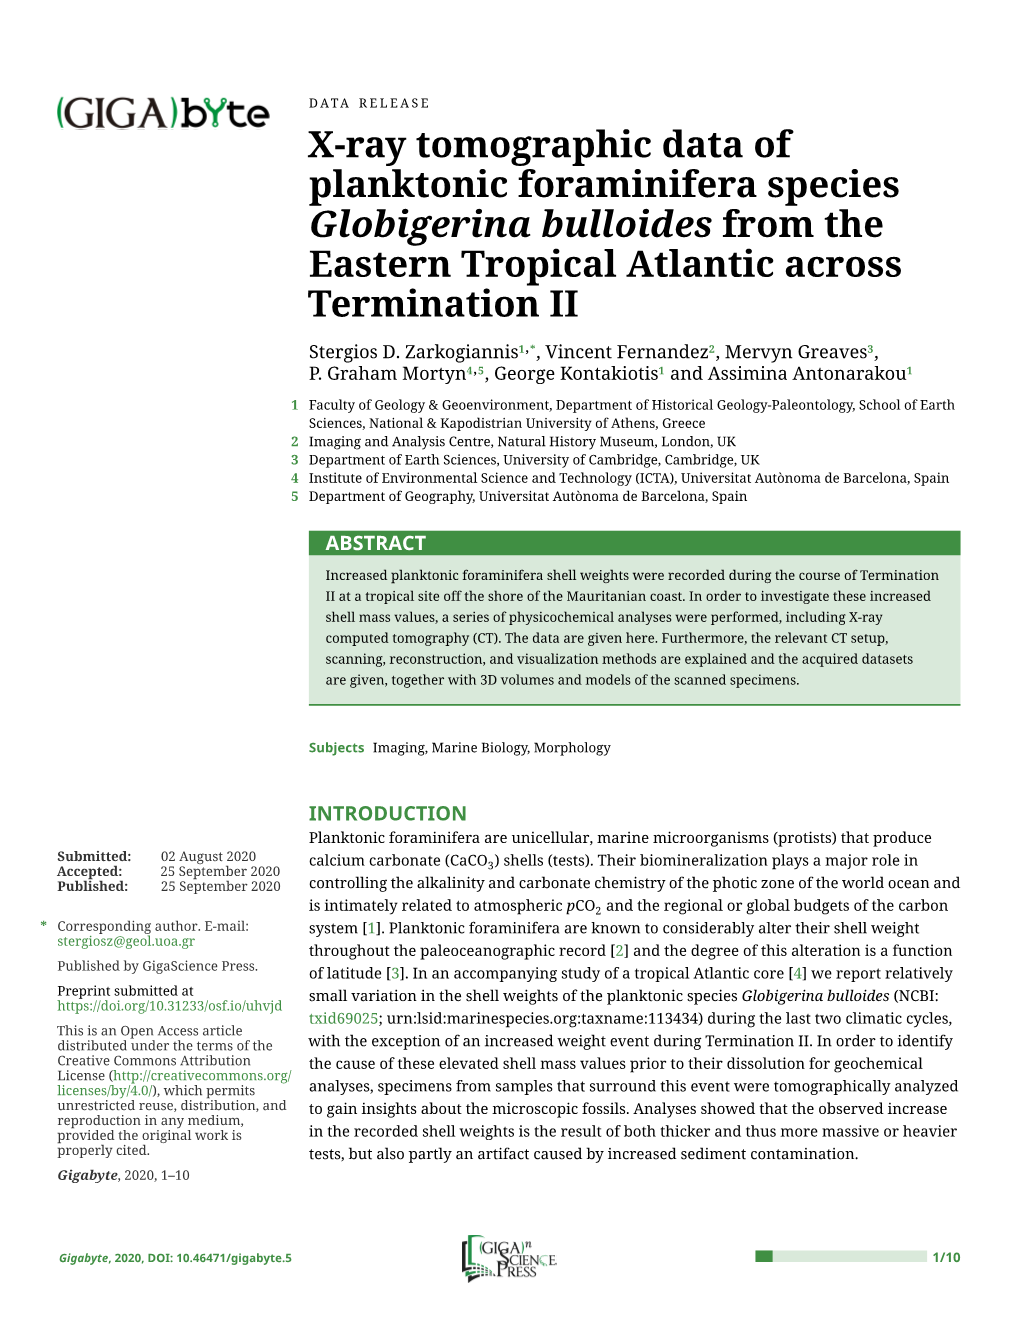 X-Ray Tomographic Data of Planktonic Foraminifera Species Globigerina Bulloides from the Eastern Tropical Atlantic Across Termination II Stergios D